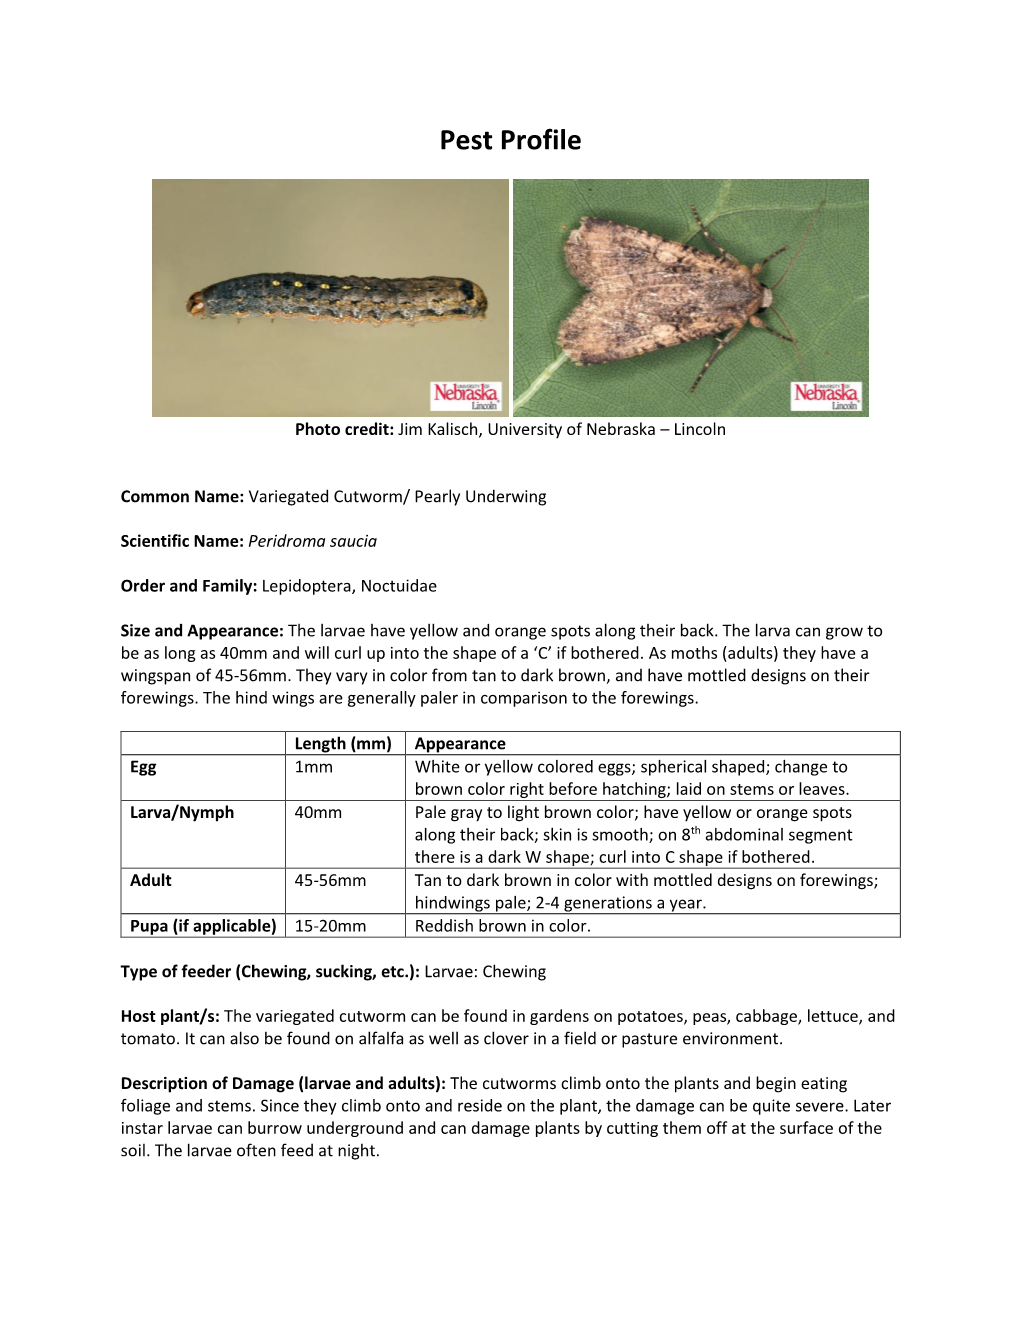 Variegated Cutworm/ Pearly Underwing